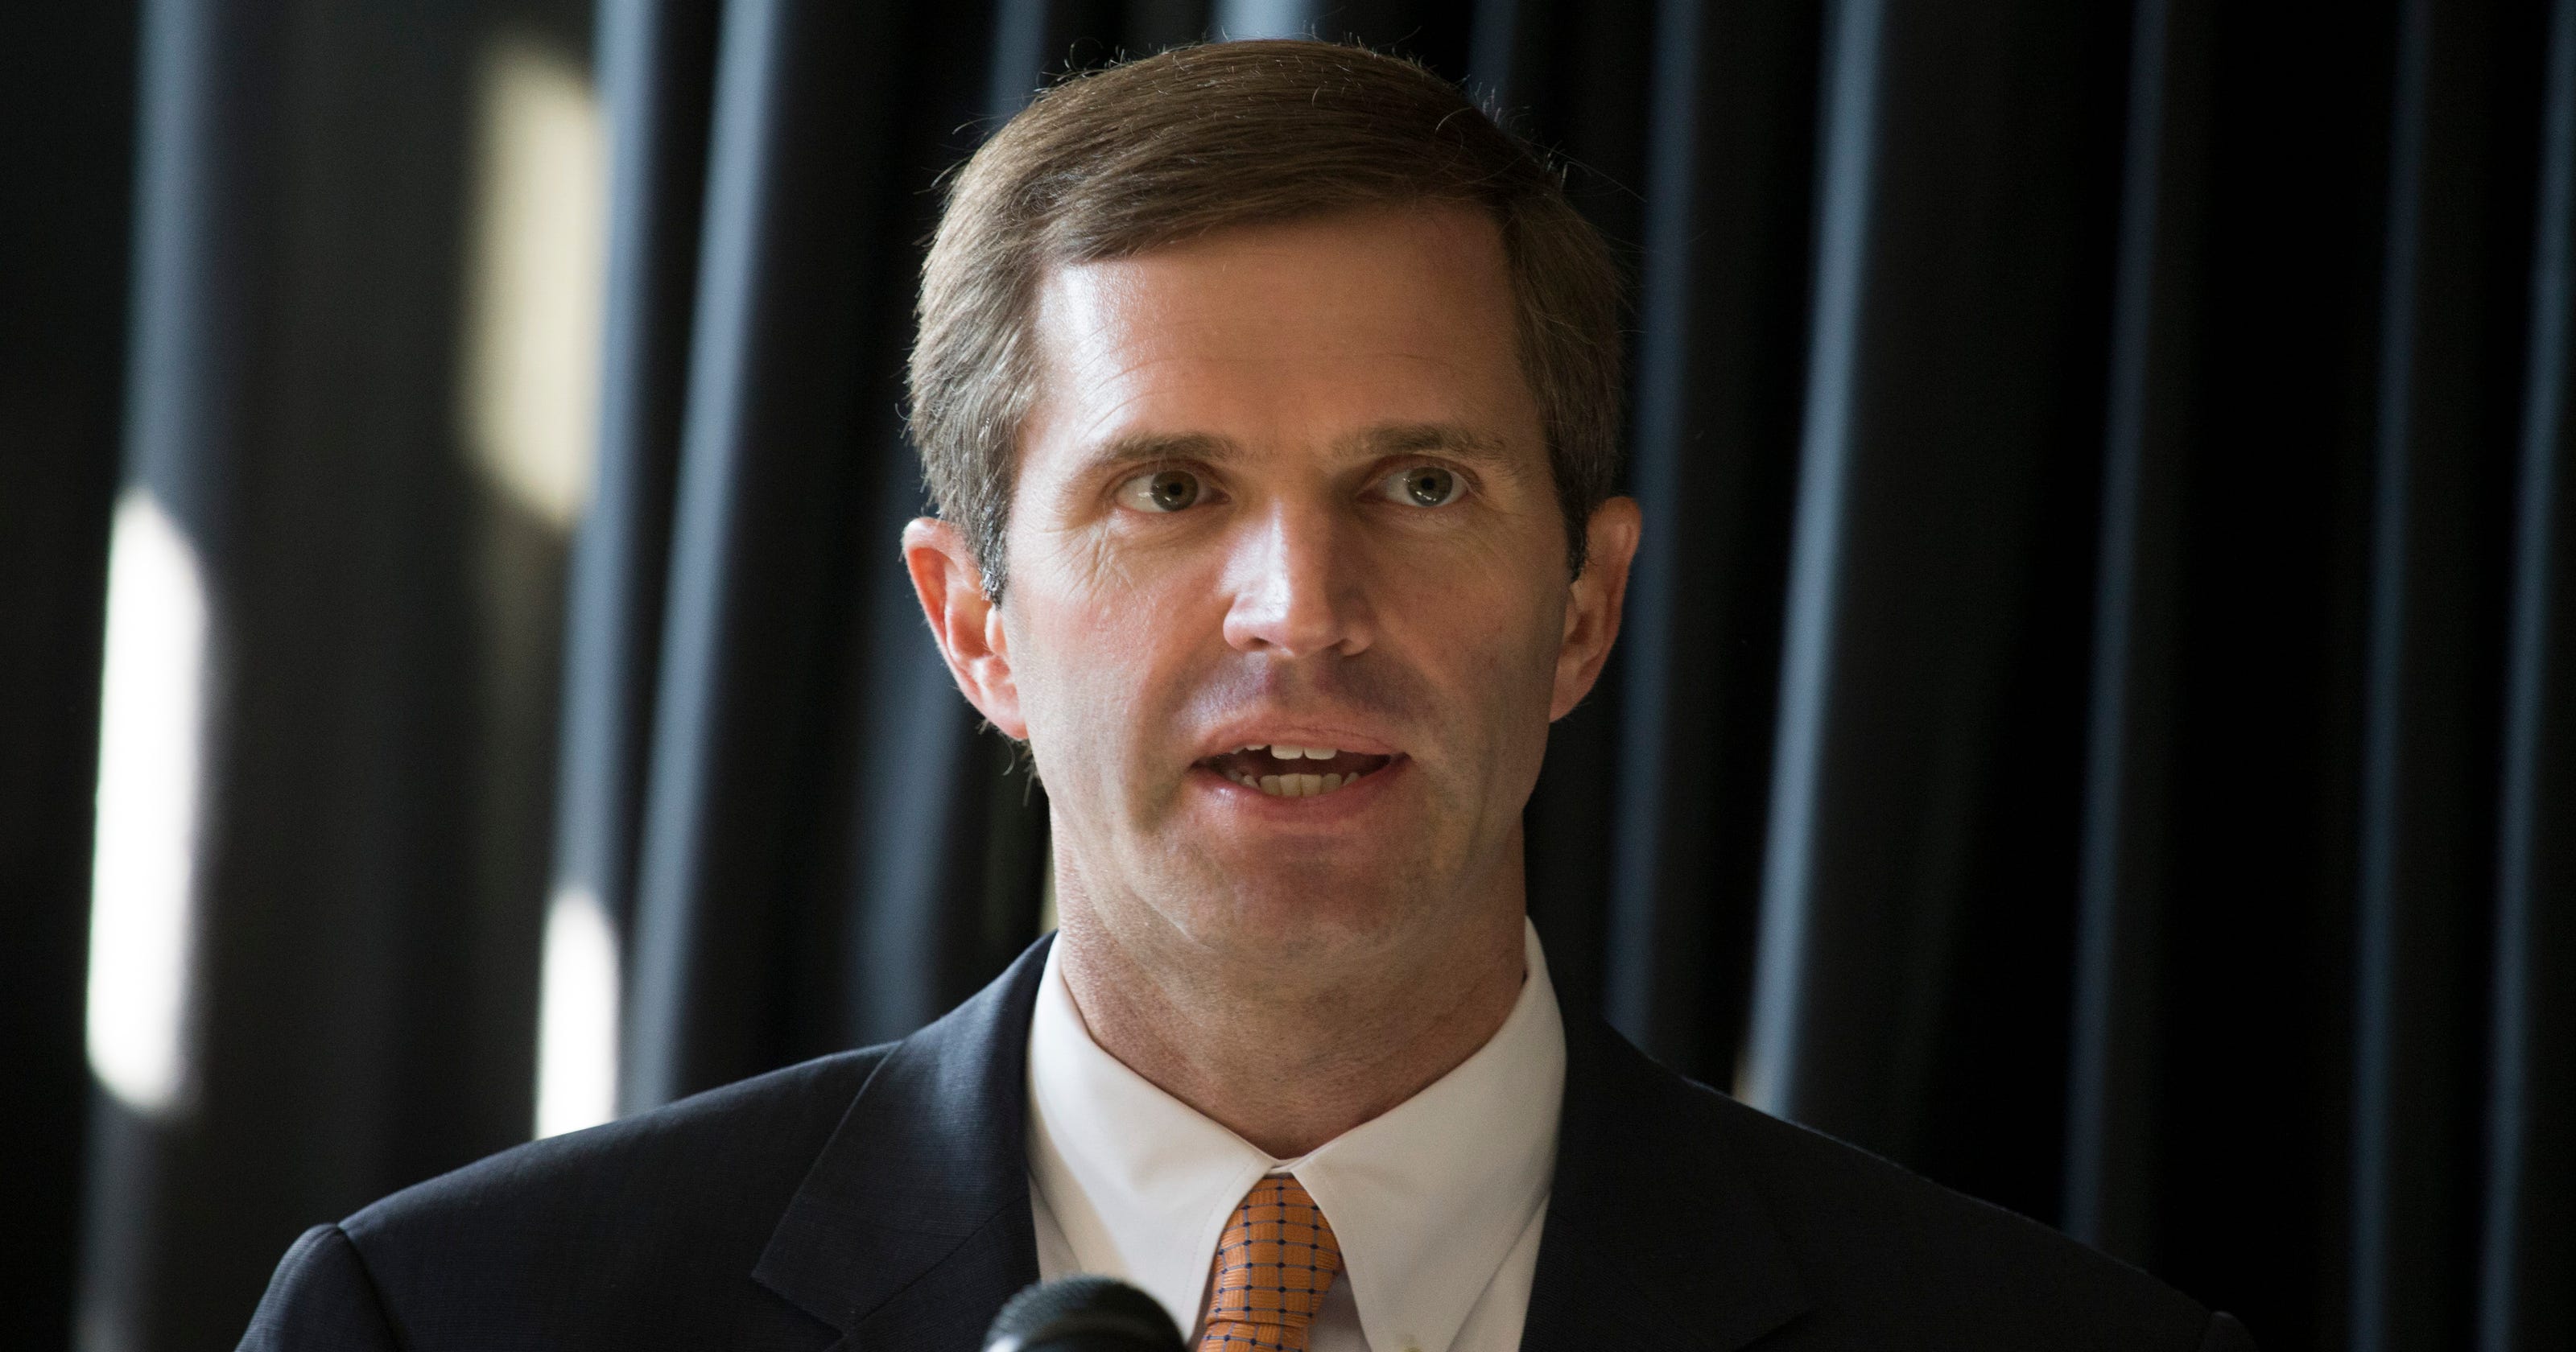 Andy Beshear goes after teacher vote in announcing bid for governor